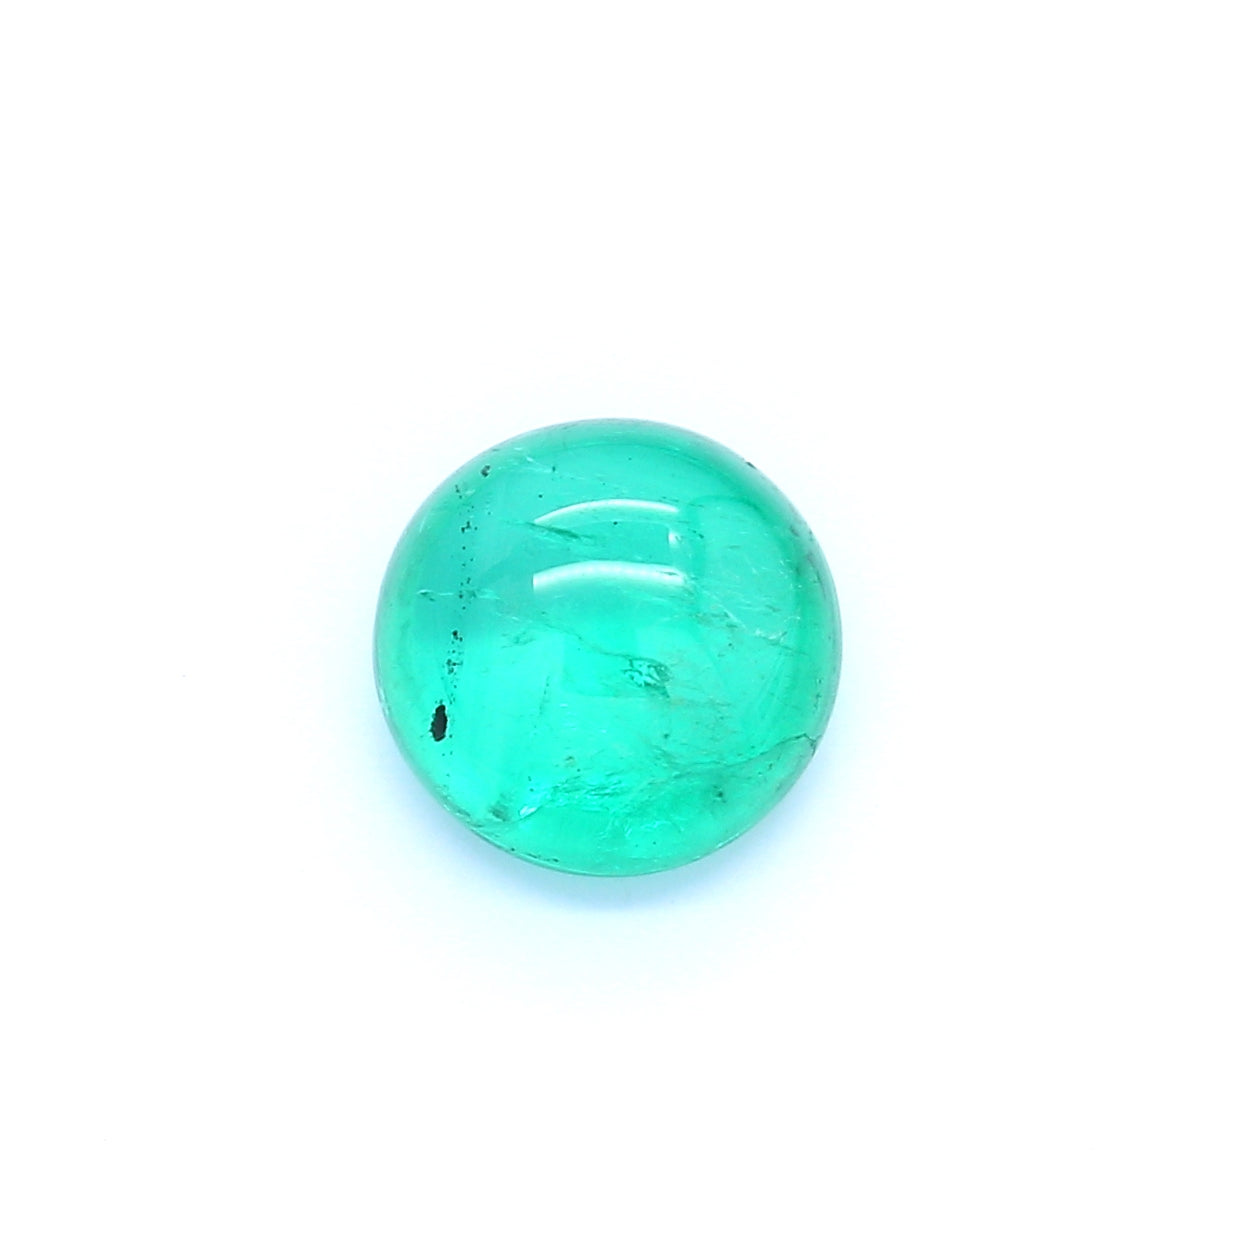 2.26ct Round Cabochon Emerald, Moderate Oil, Colombia - 8.13 - 8.21 x 4.86mm